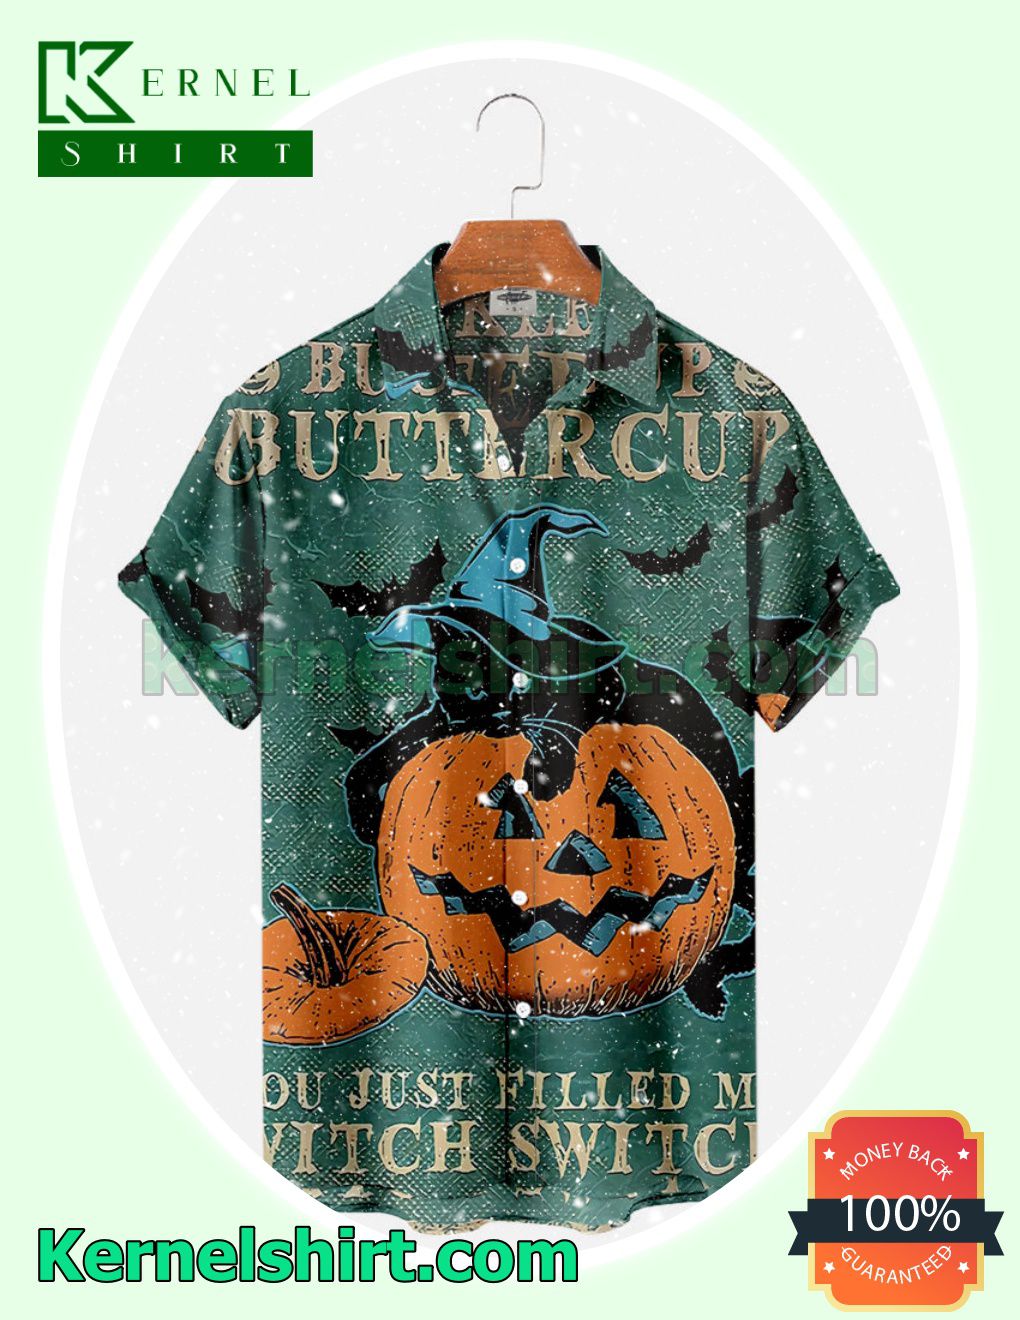 Cat Pumpkin Buckle Up Buttercup You Just Filled Me Witch Switch Halloween Costume Shirt